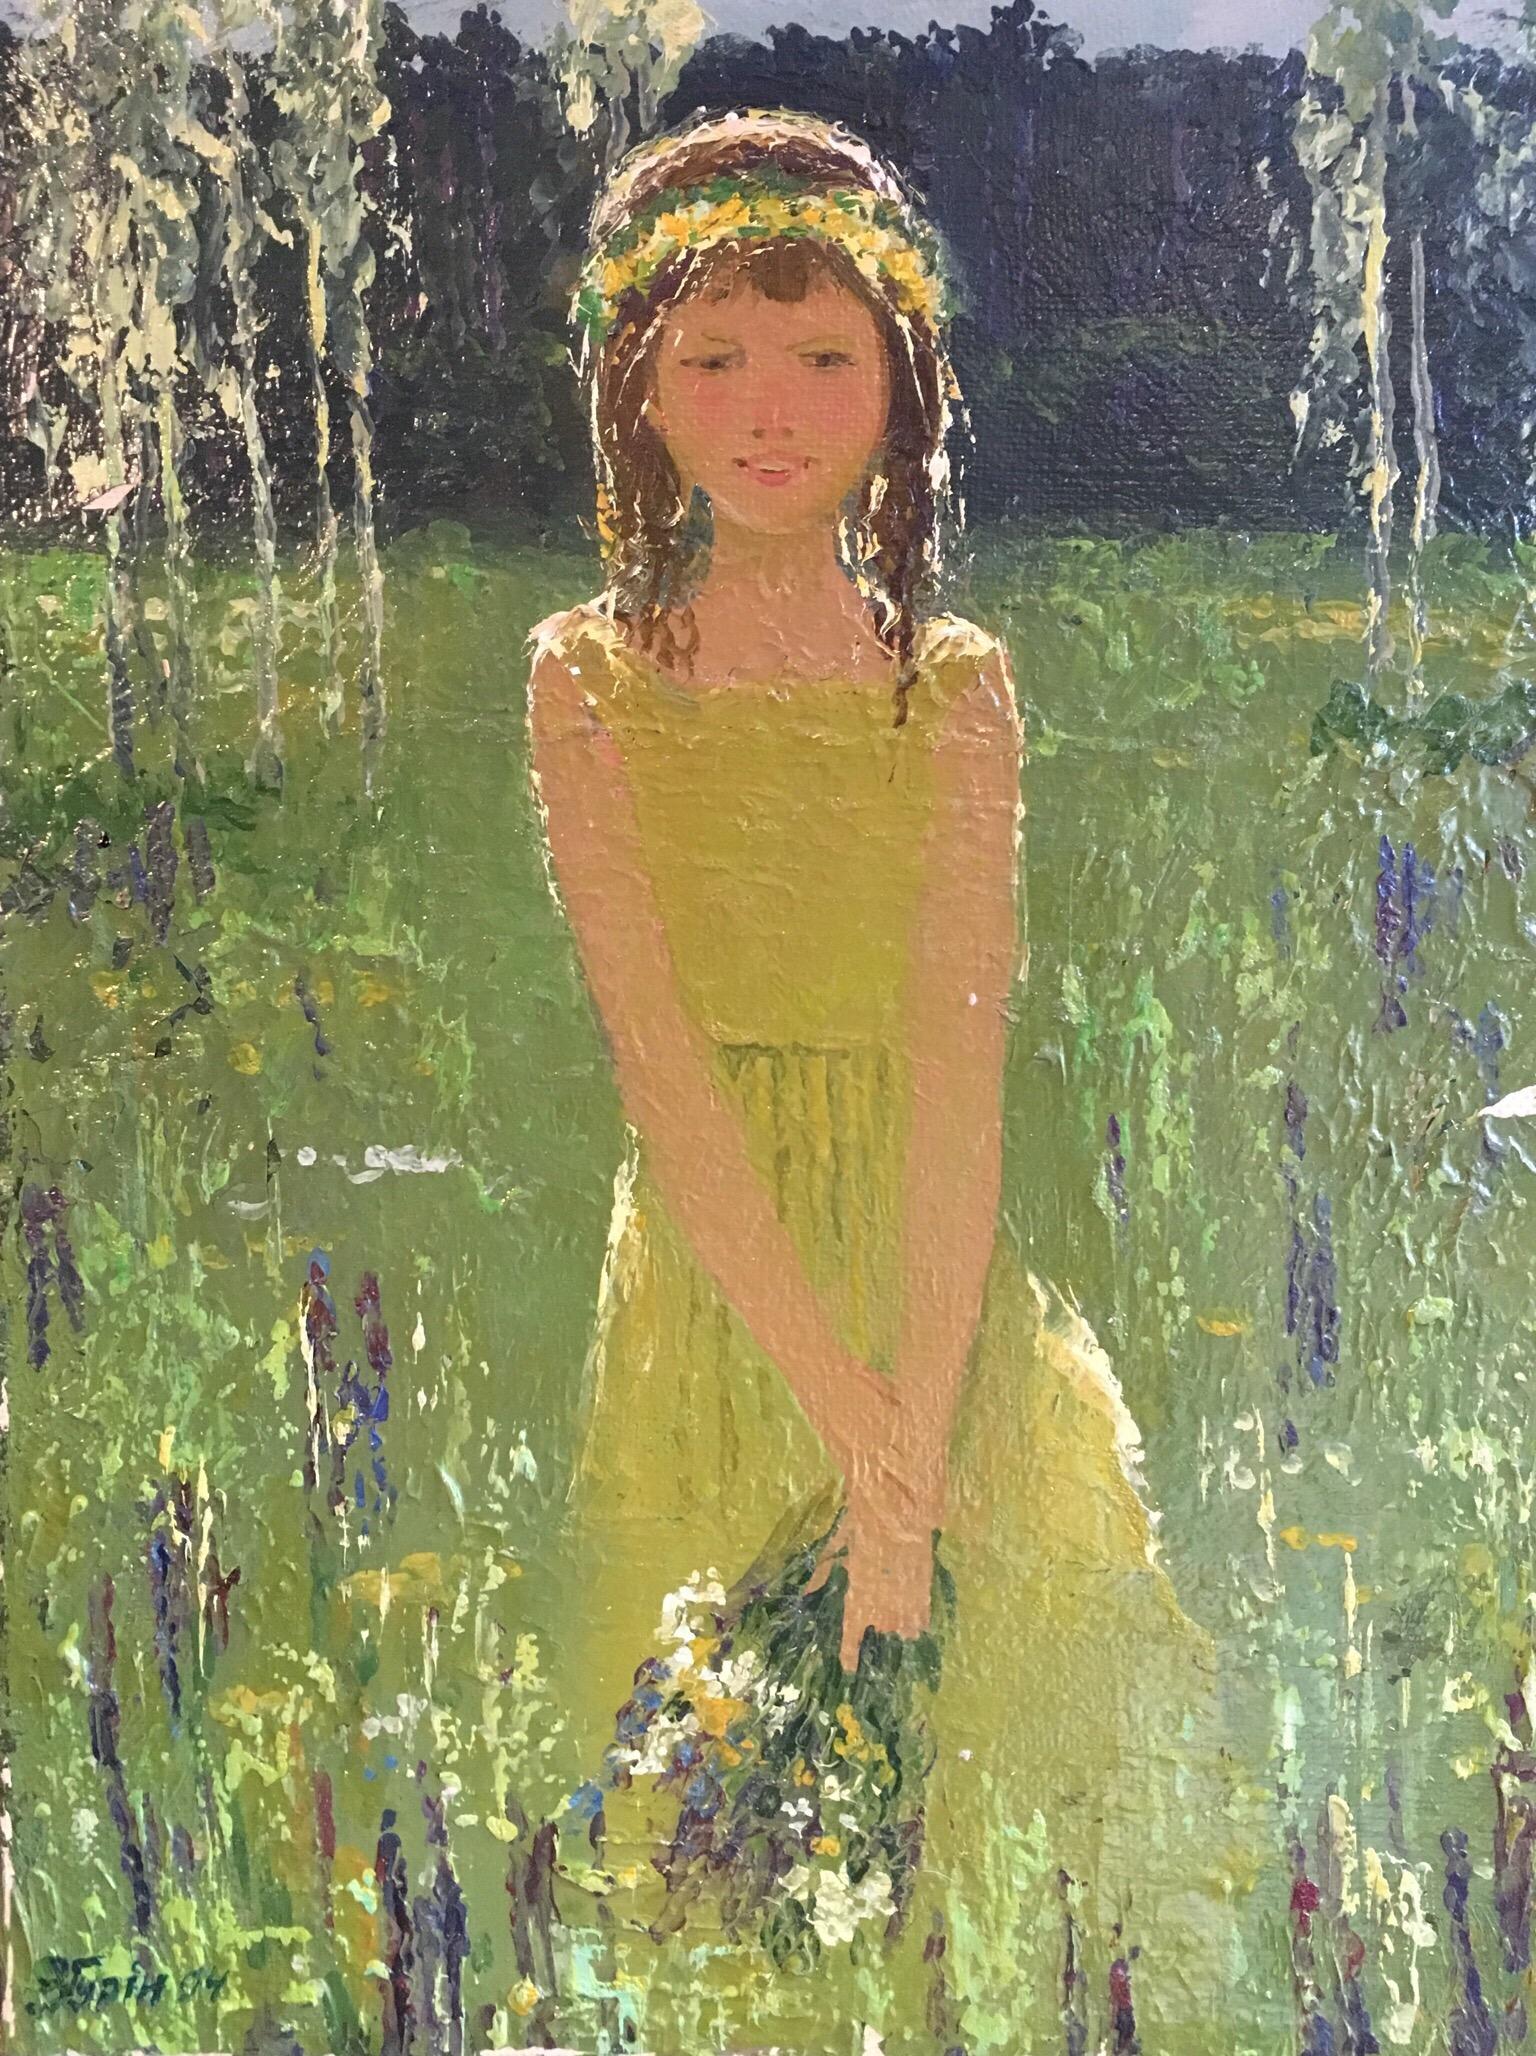 Typih B.I. Portrait Painting - "Aito" Impressionist Portrait, Ethereal Green, Original Signed Oil Painting